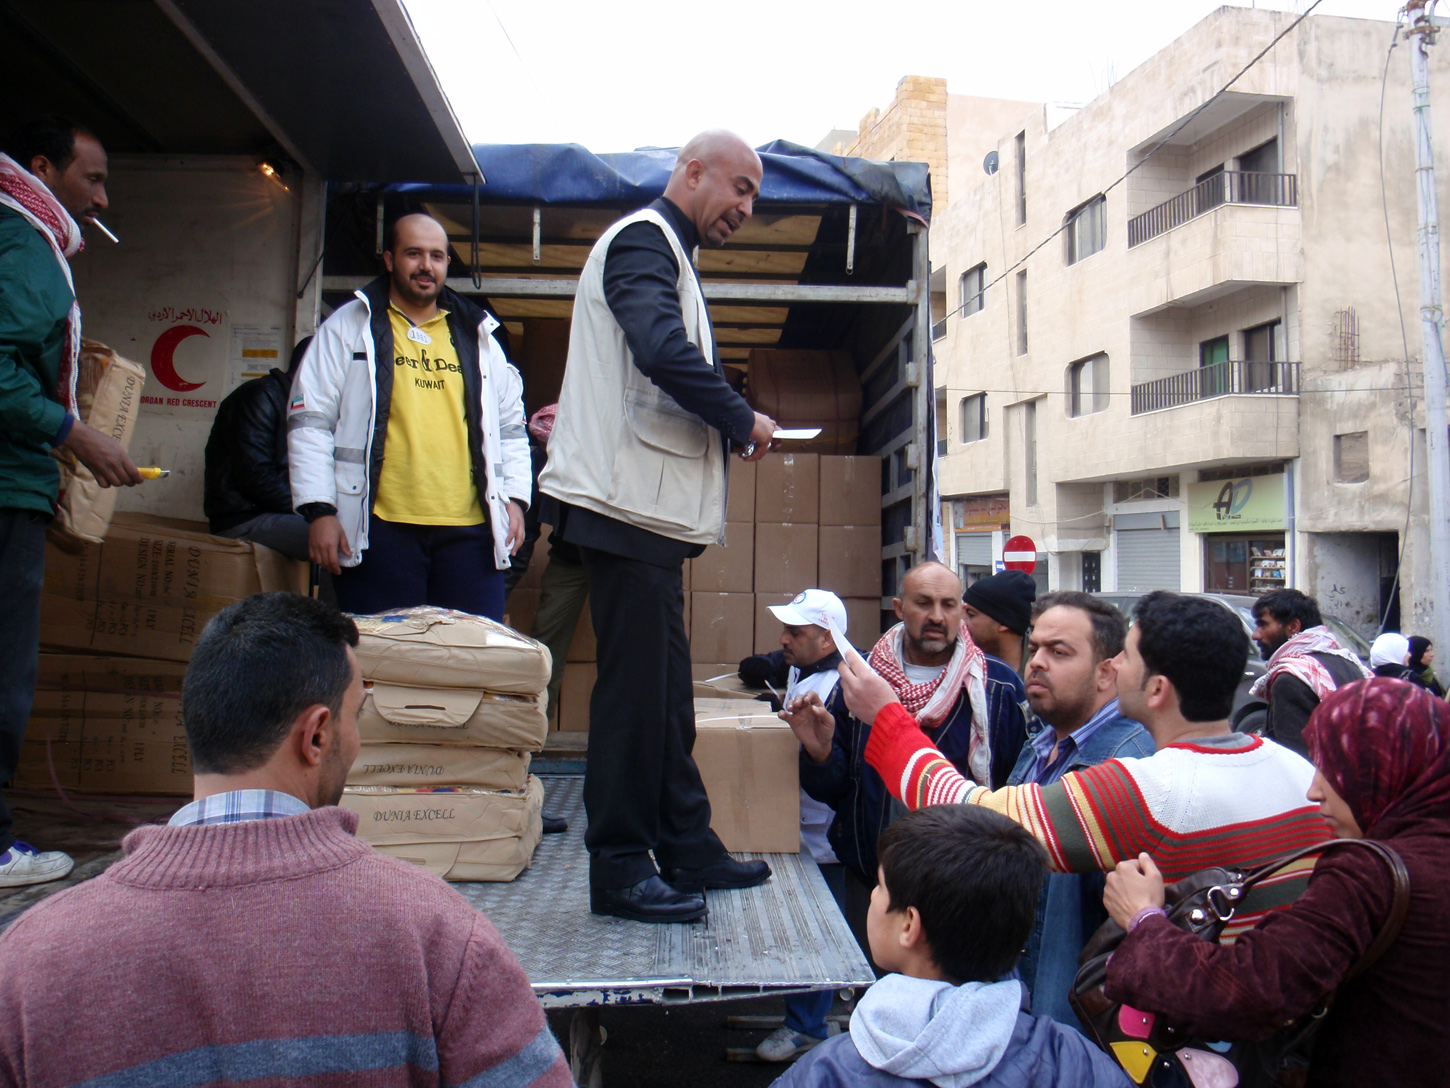 KRCS launches "Ragheef" campaign for Syrian refugees in Jordan